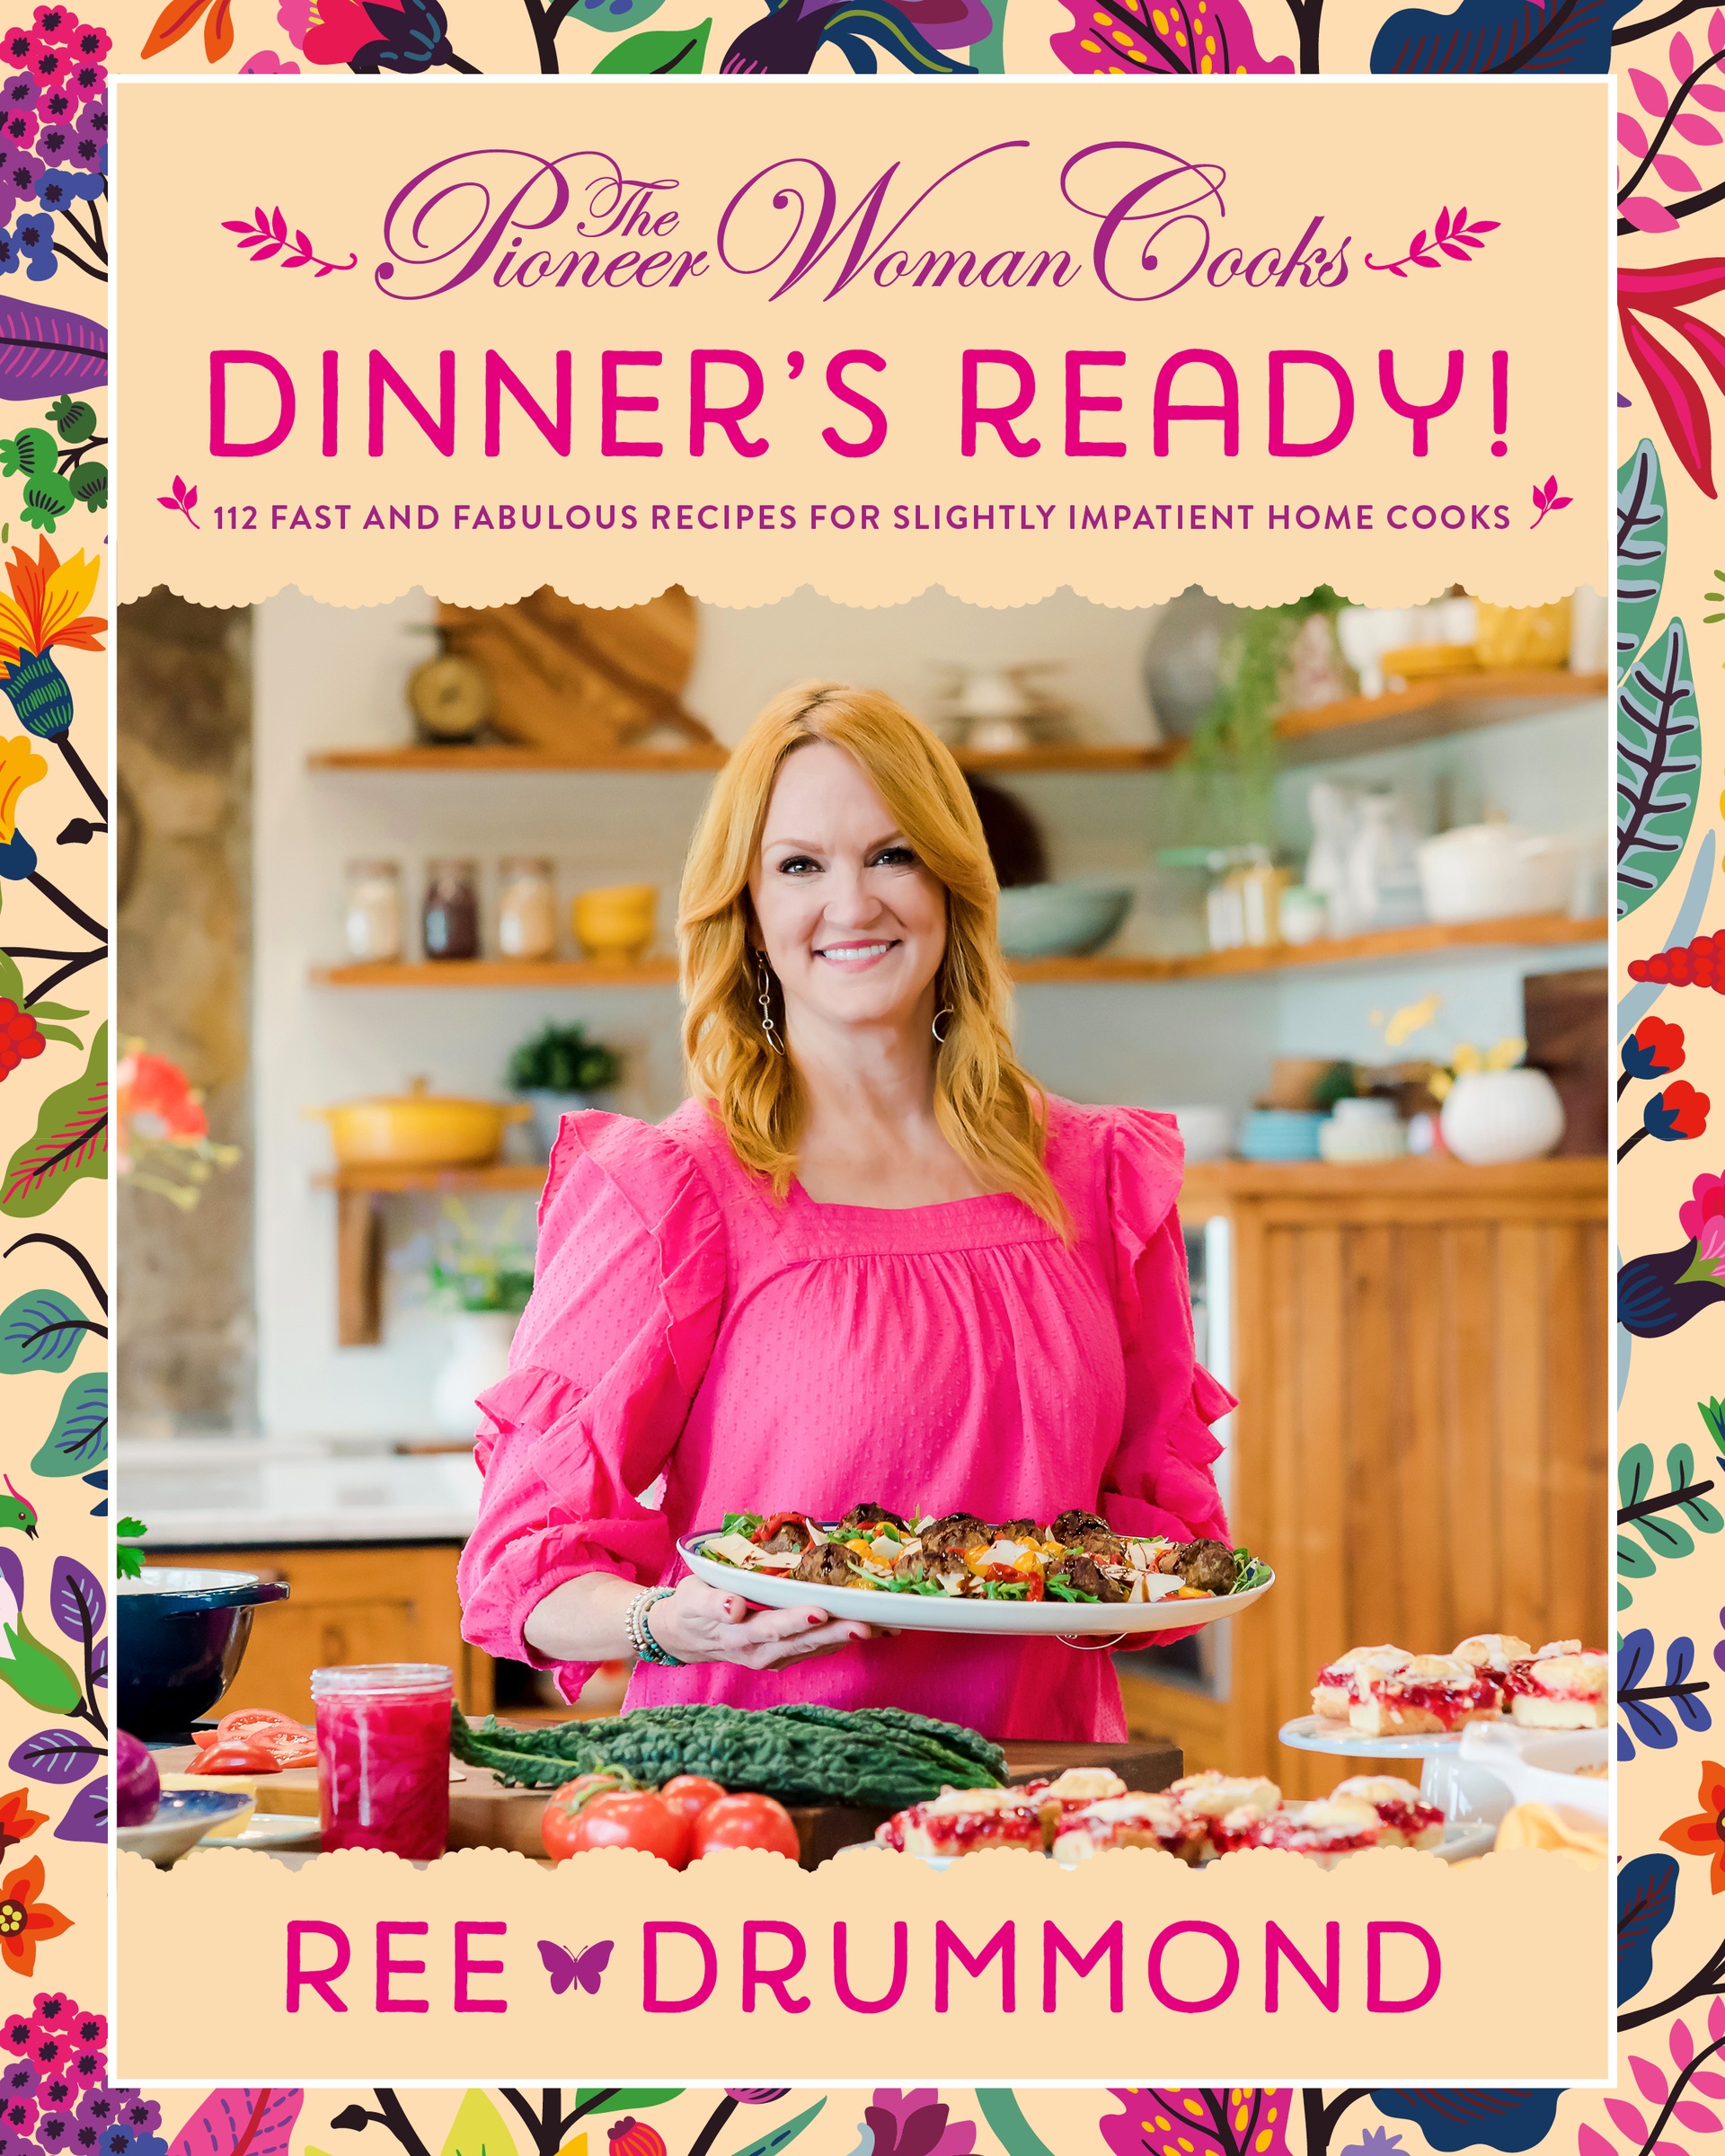 The Pioneer Woman Cooks Dinner's Ready! 112 Fast and Fabulous Recipes for Slightly Impatient Home Cooks cover image